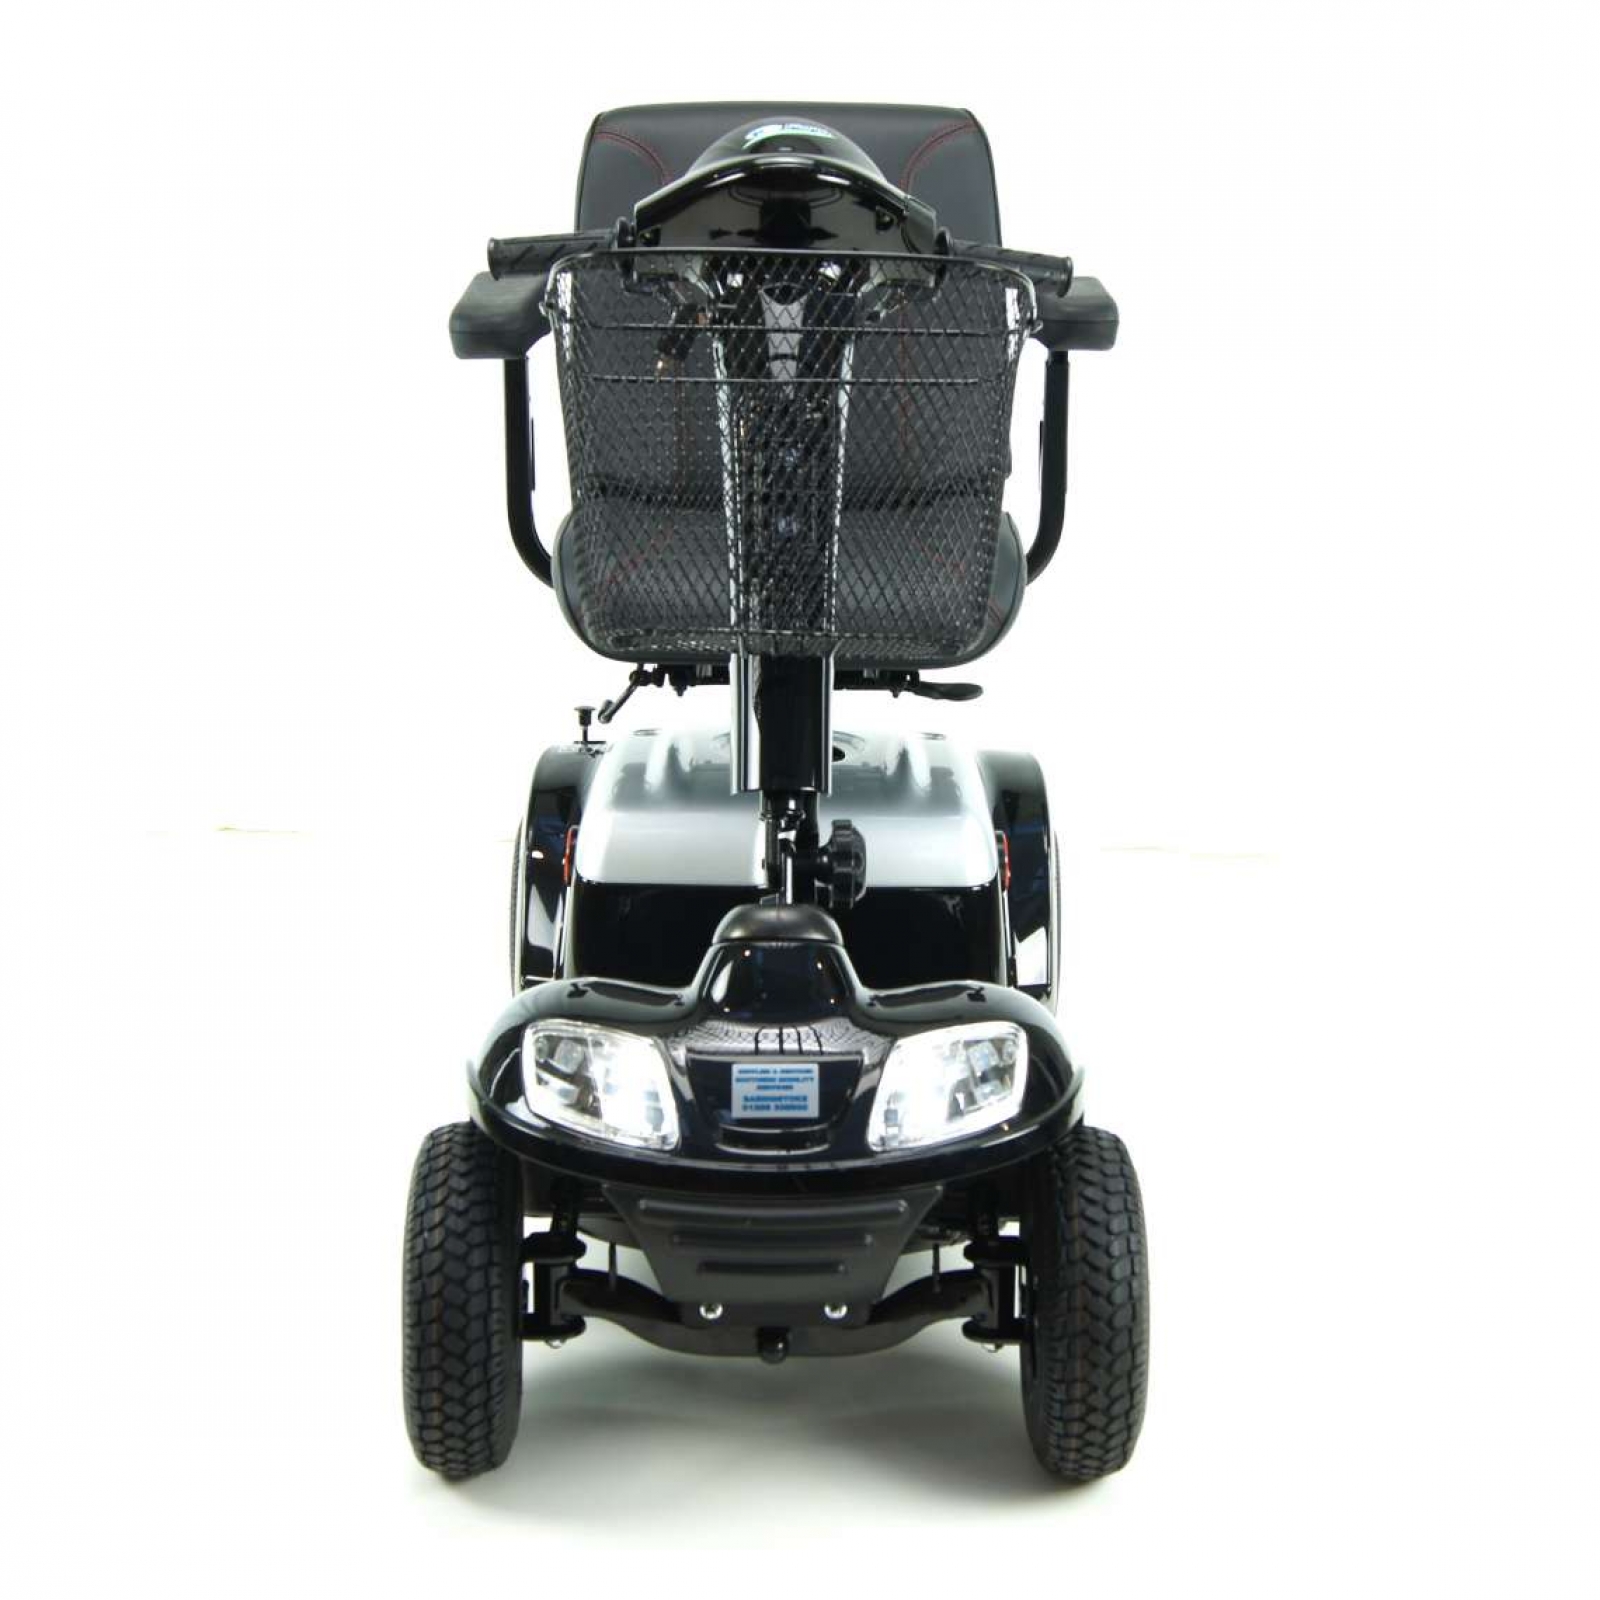 Kymco Super 4 For Pavement Scooter